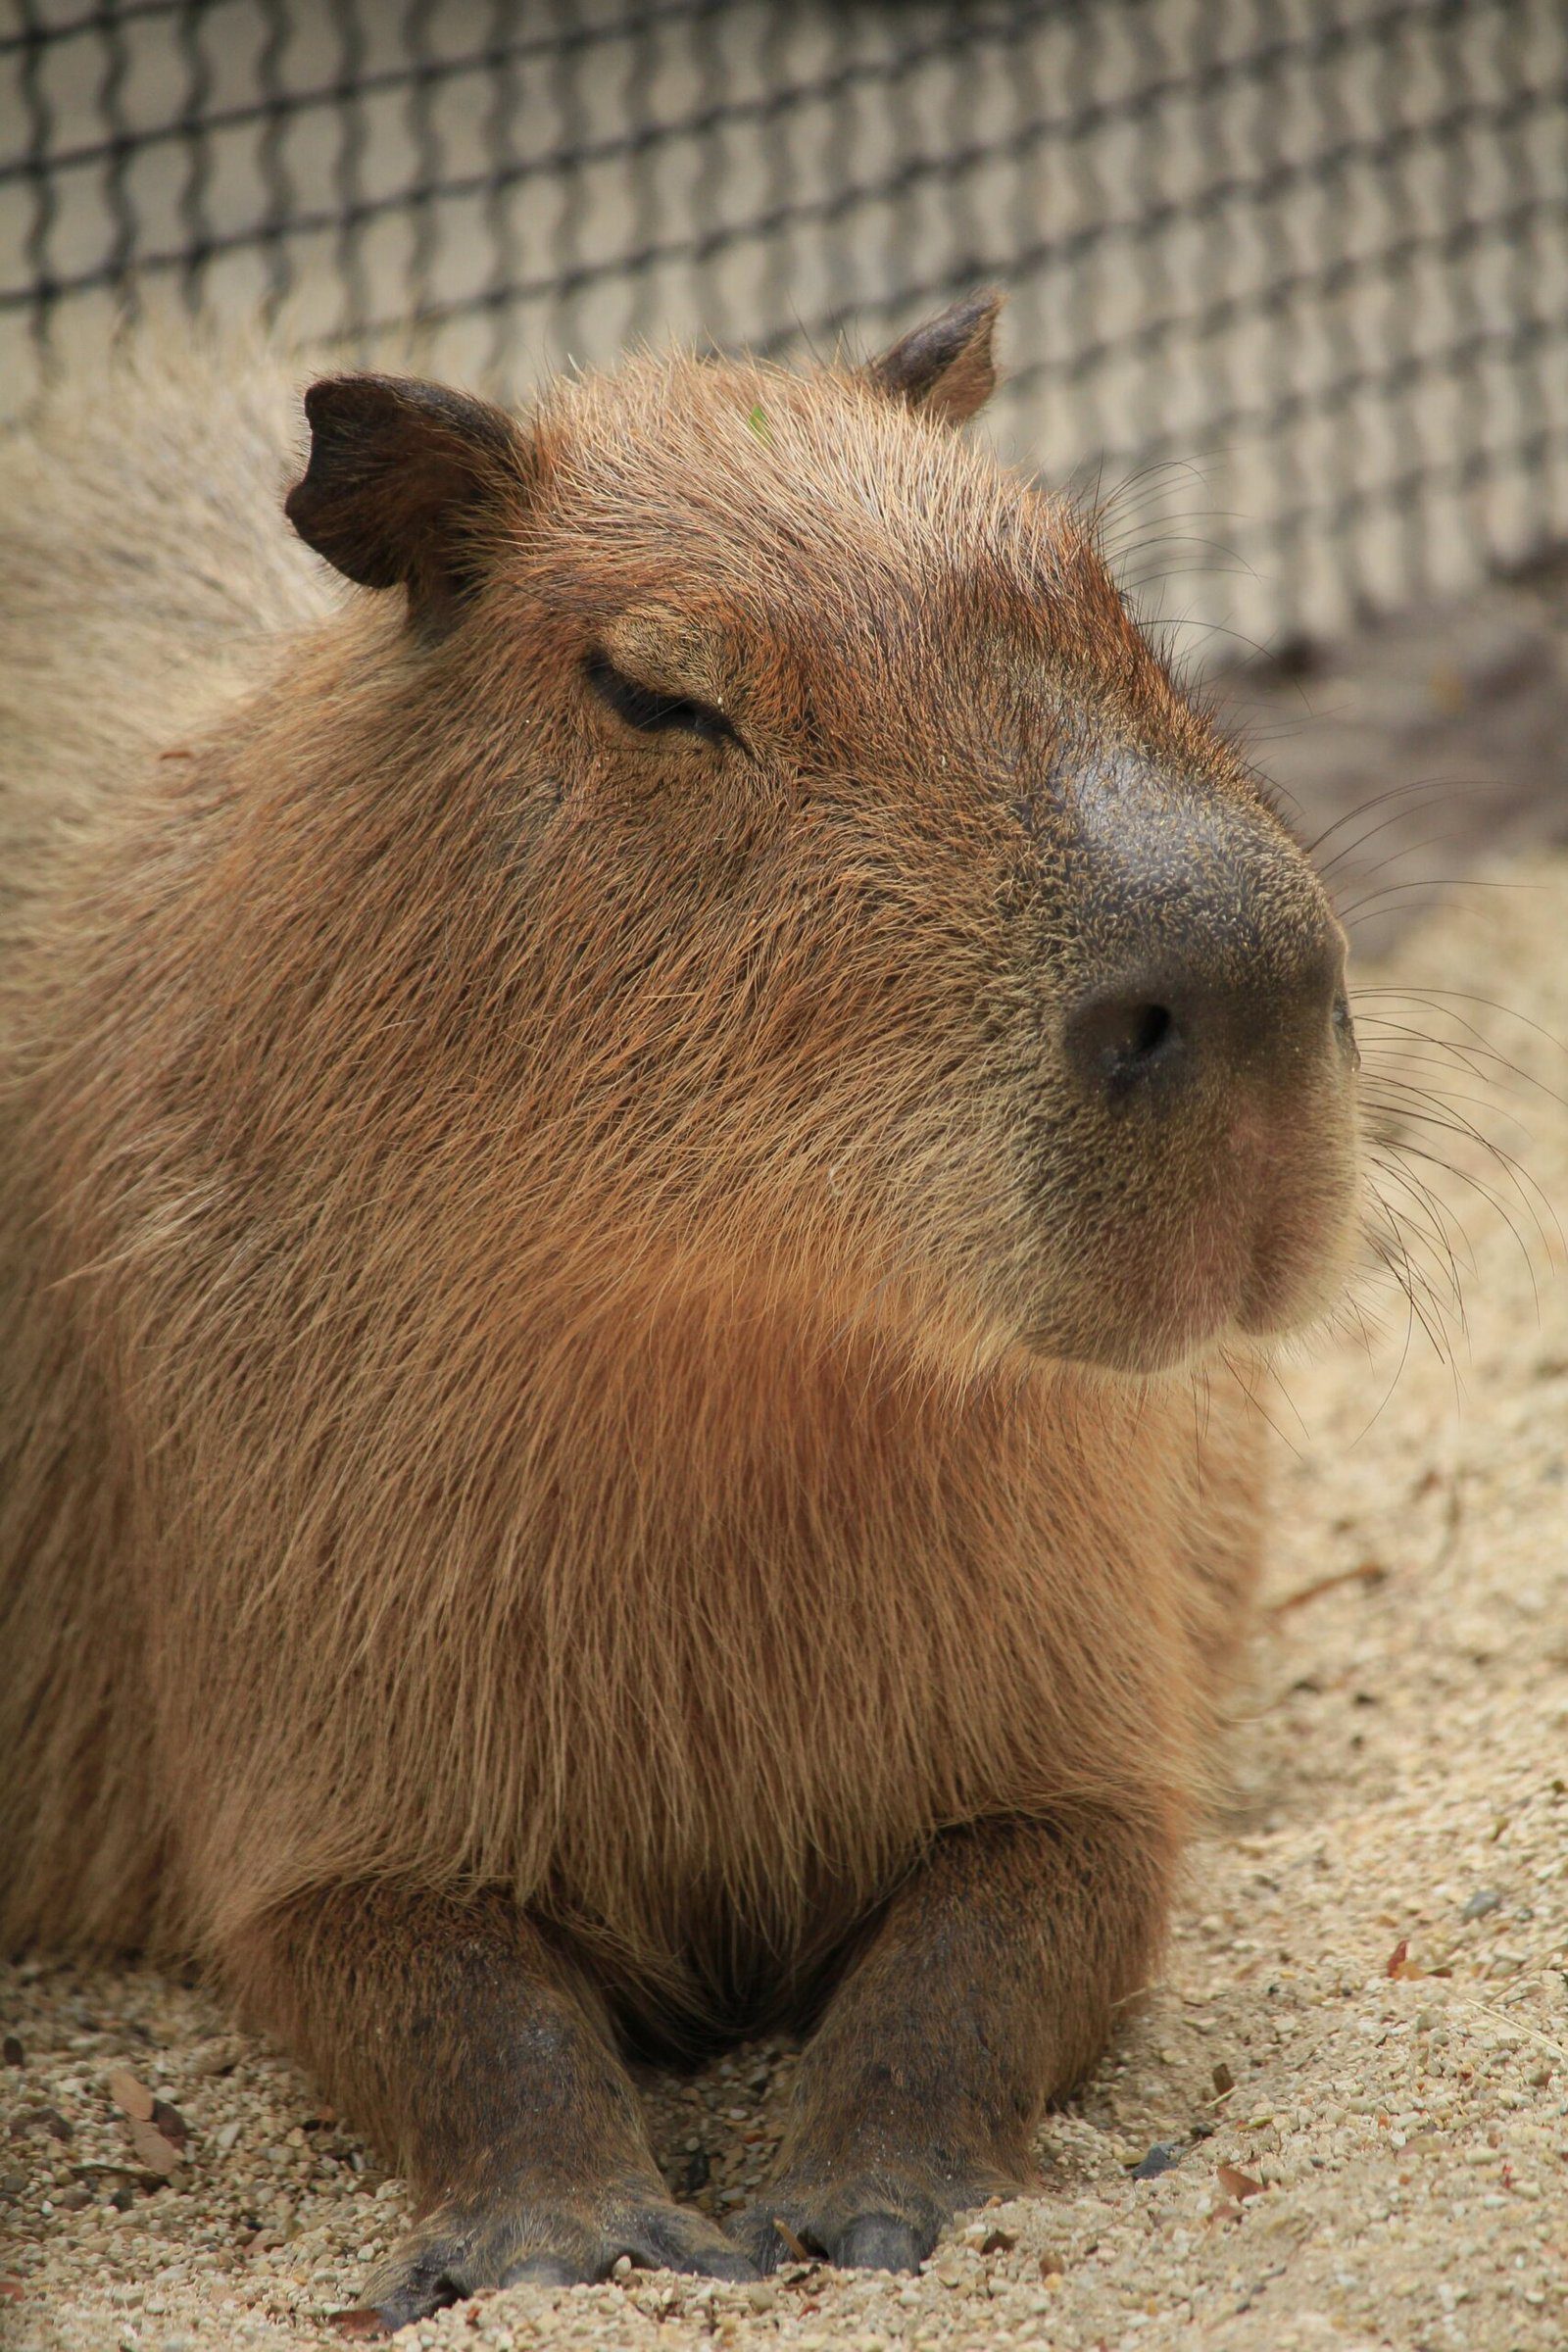 Where to Buy Capybaras in Indiana